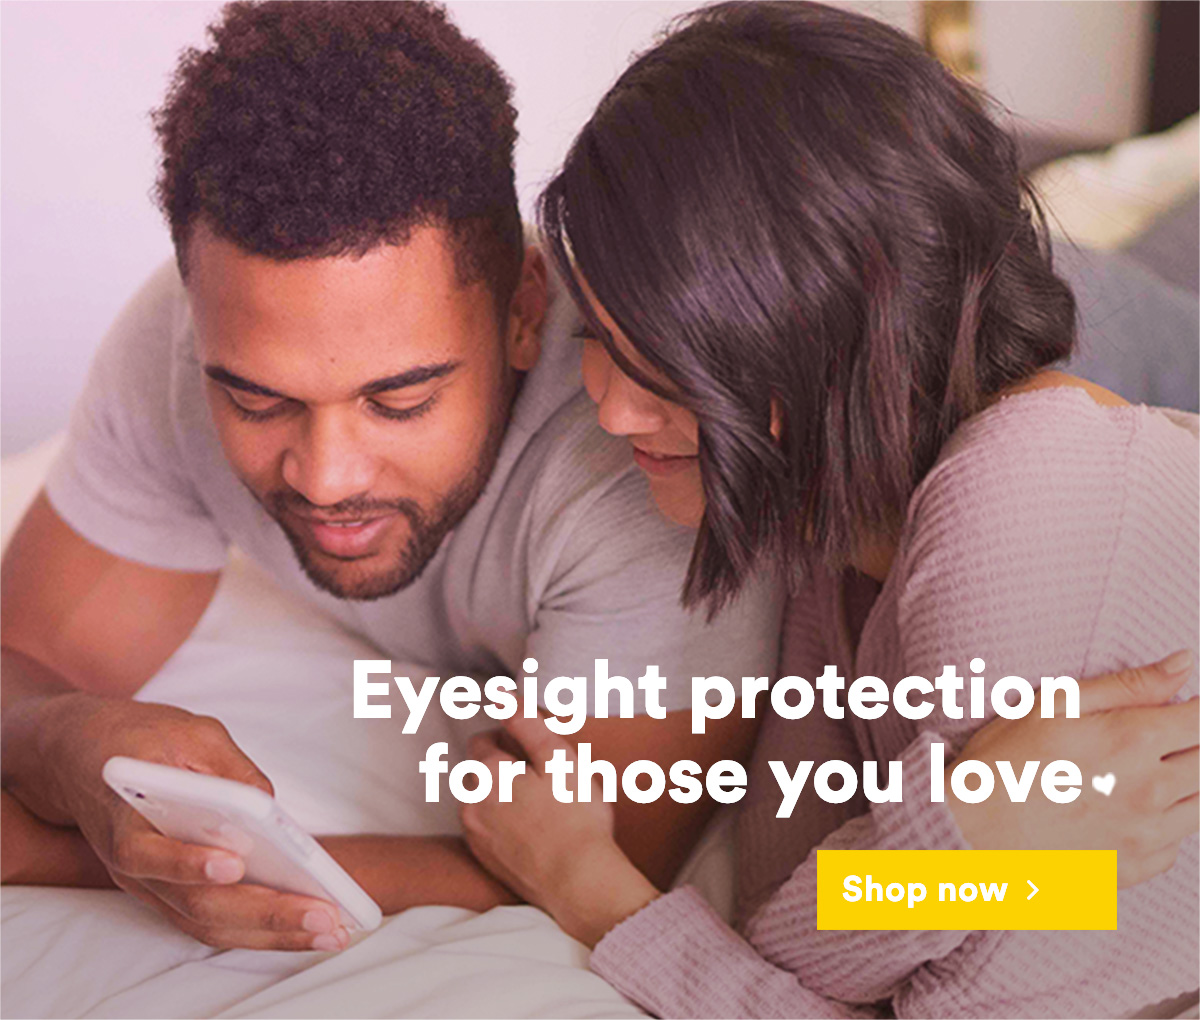 Eyesight protection for those you love.